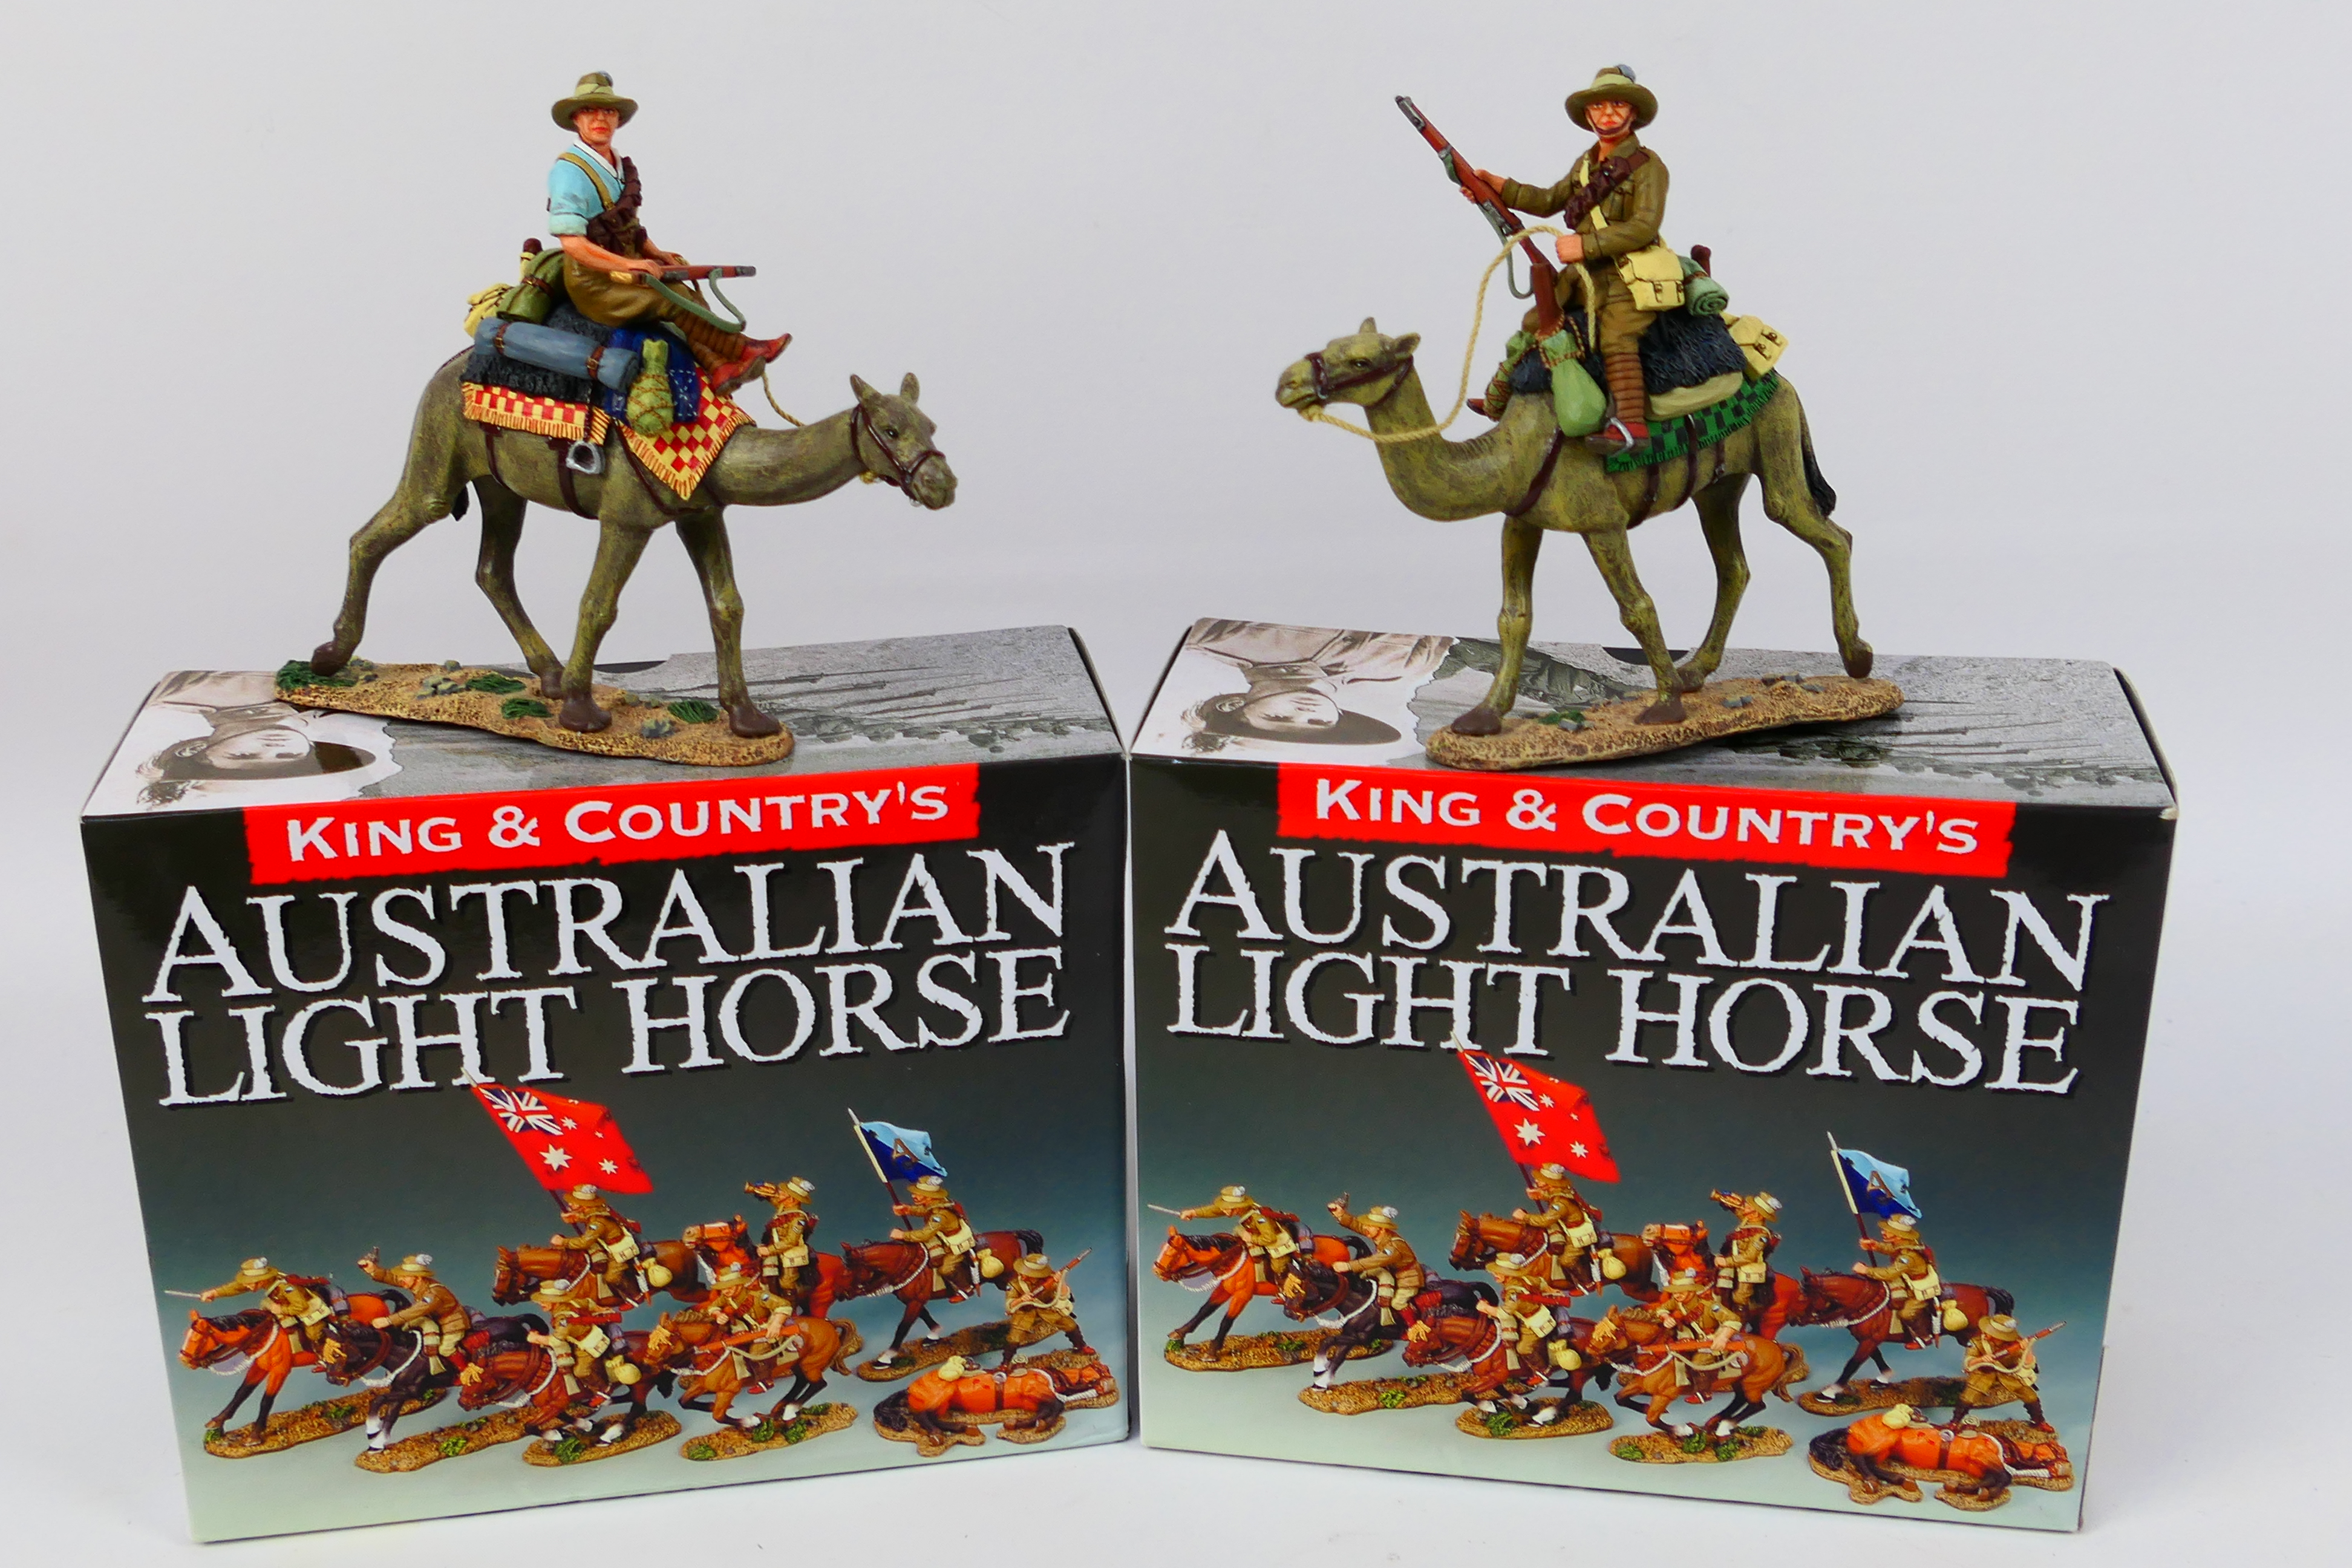 King and Country - Two boxed figures from the King and Country 'Australian Light Horse' series.